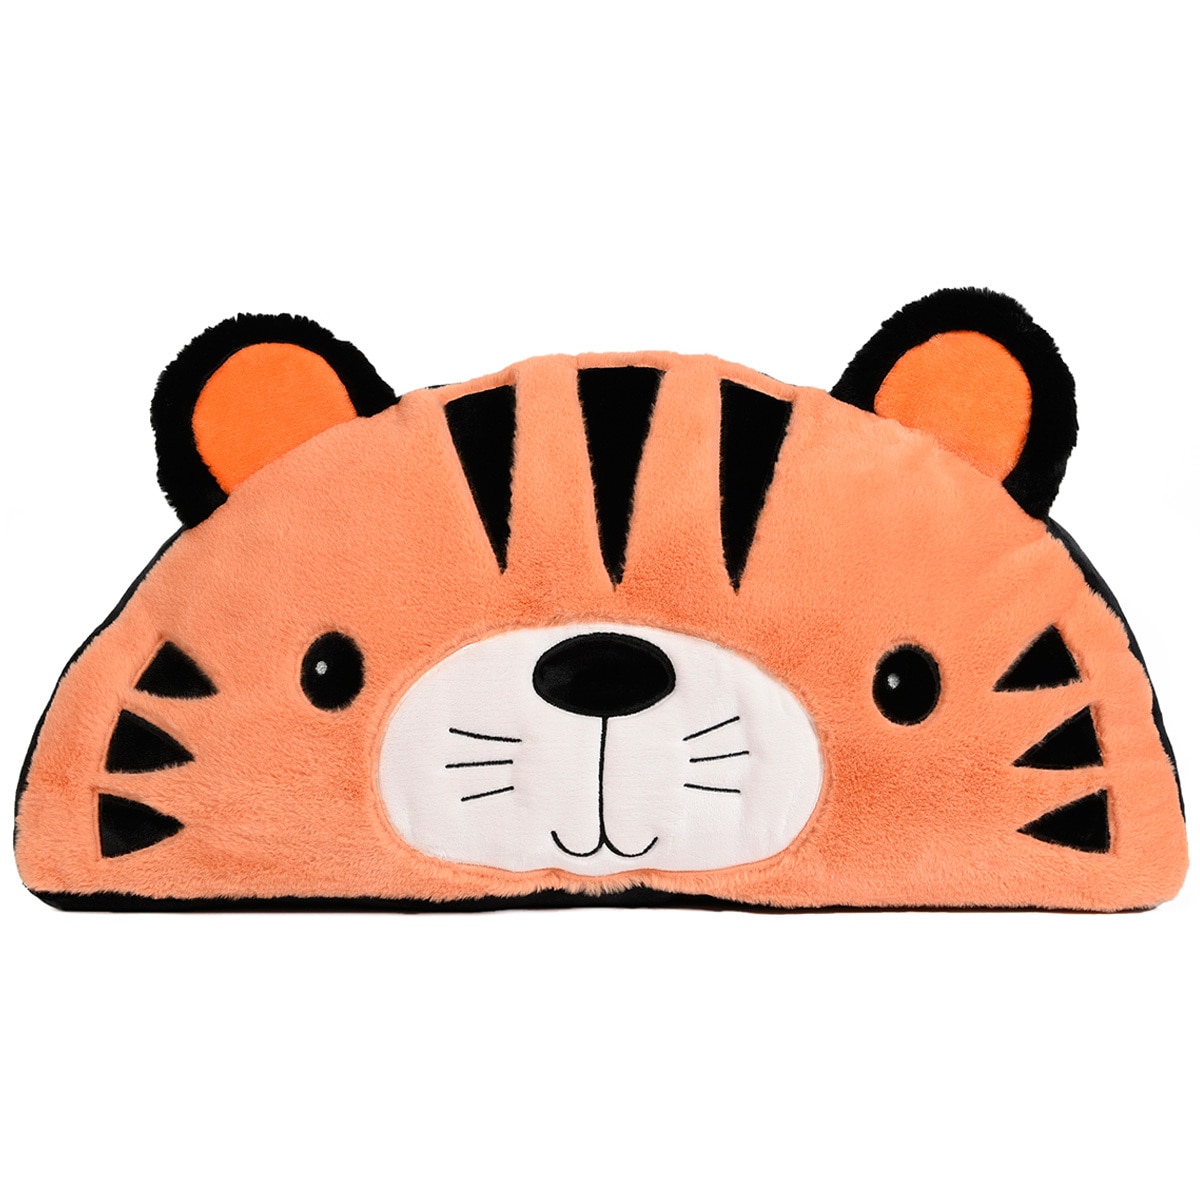 Little Miracles Plush Buddy - Tiger